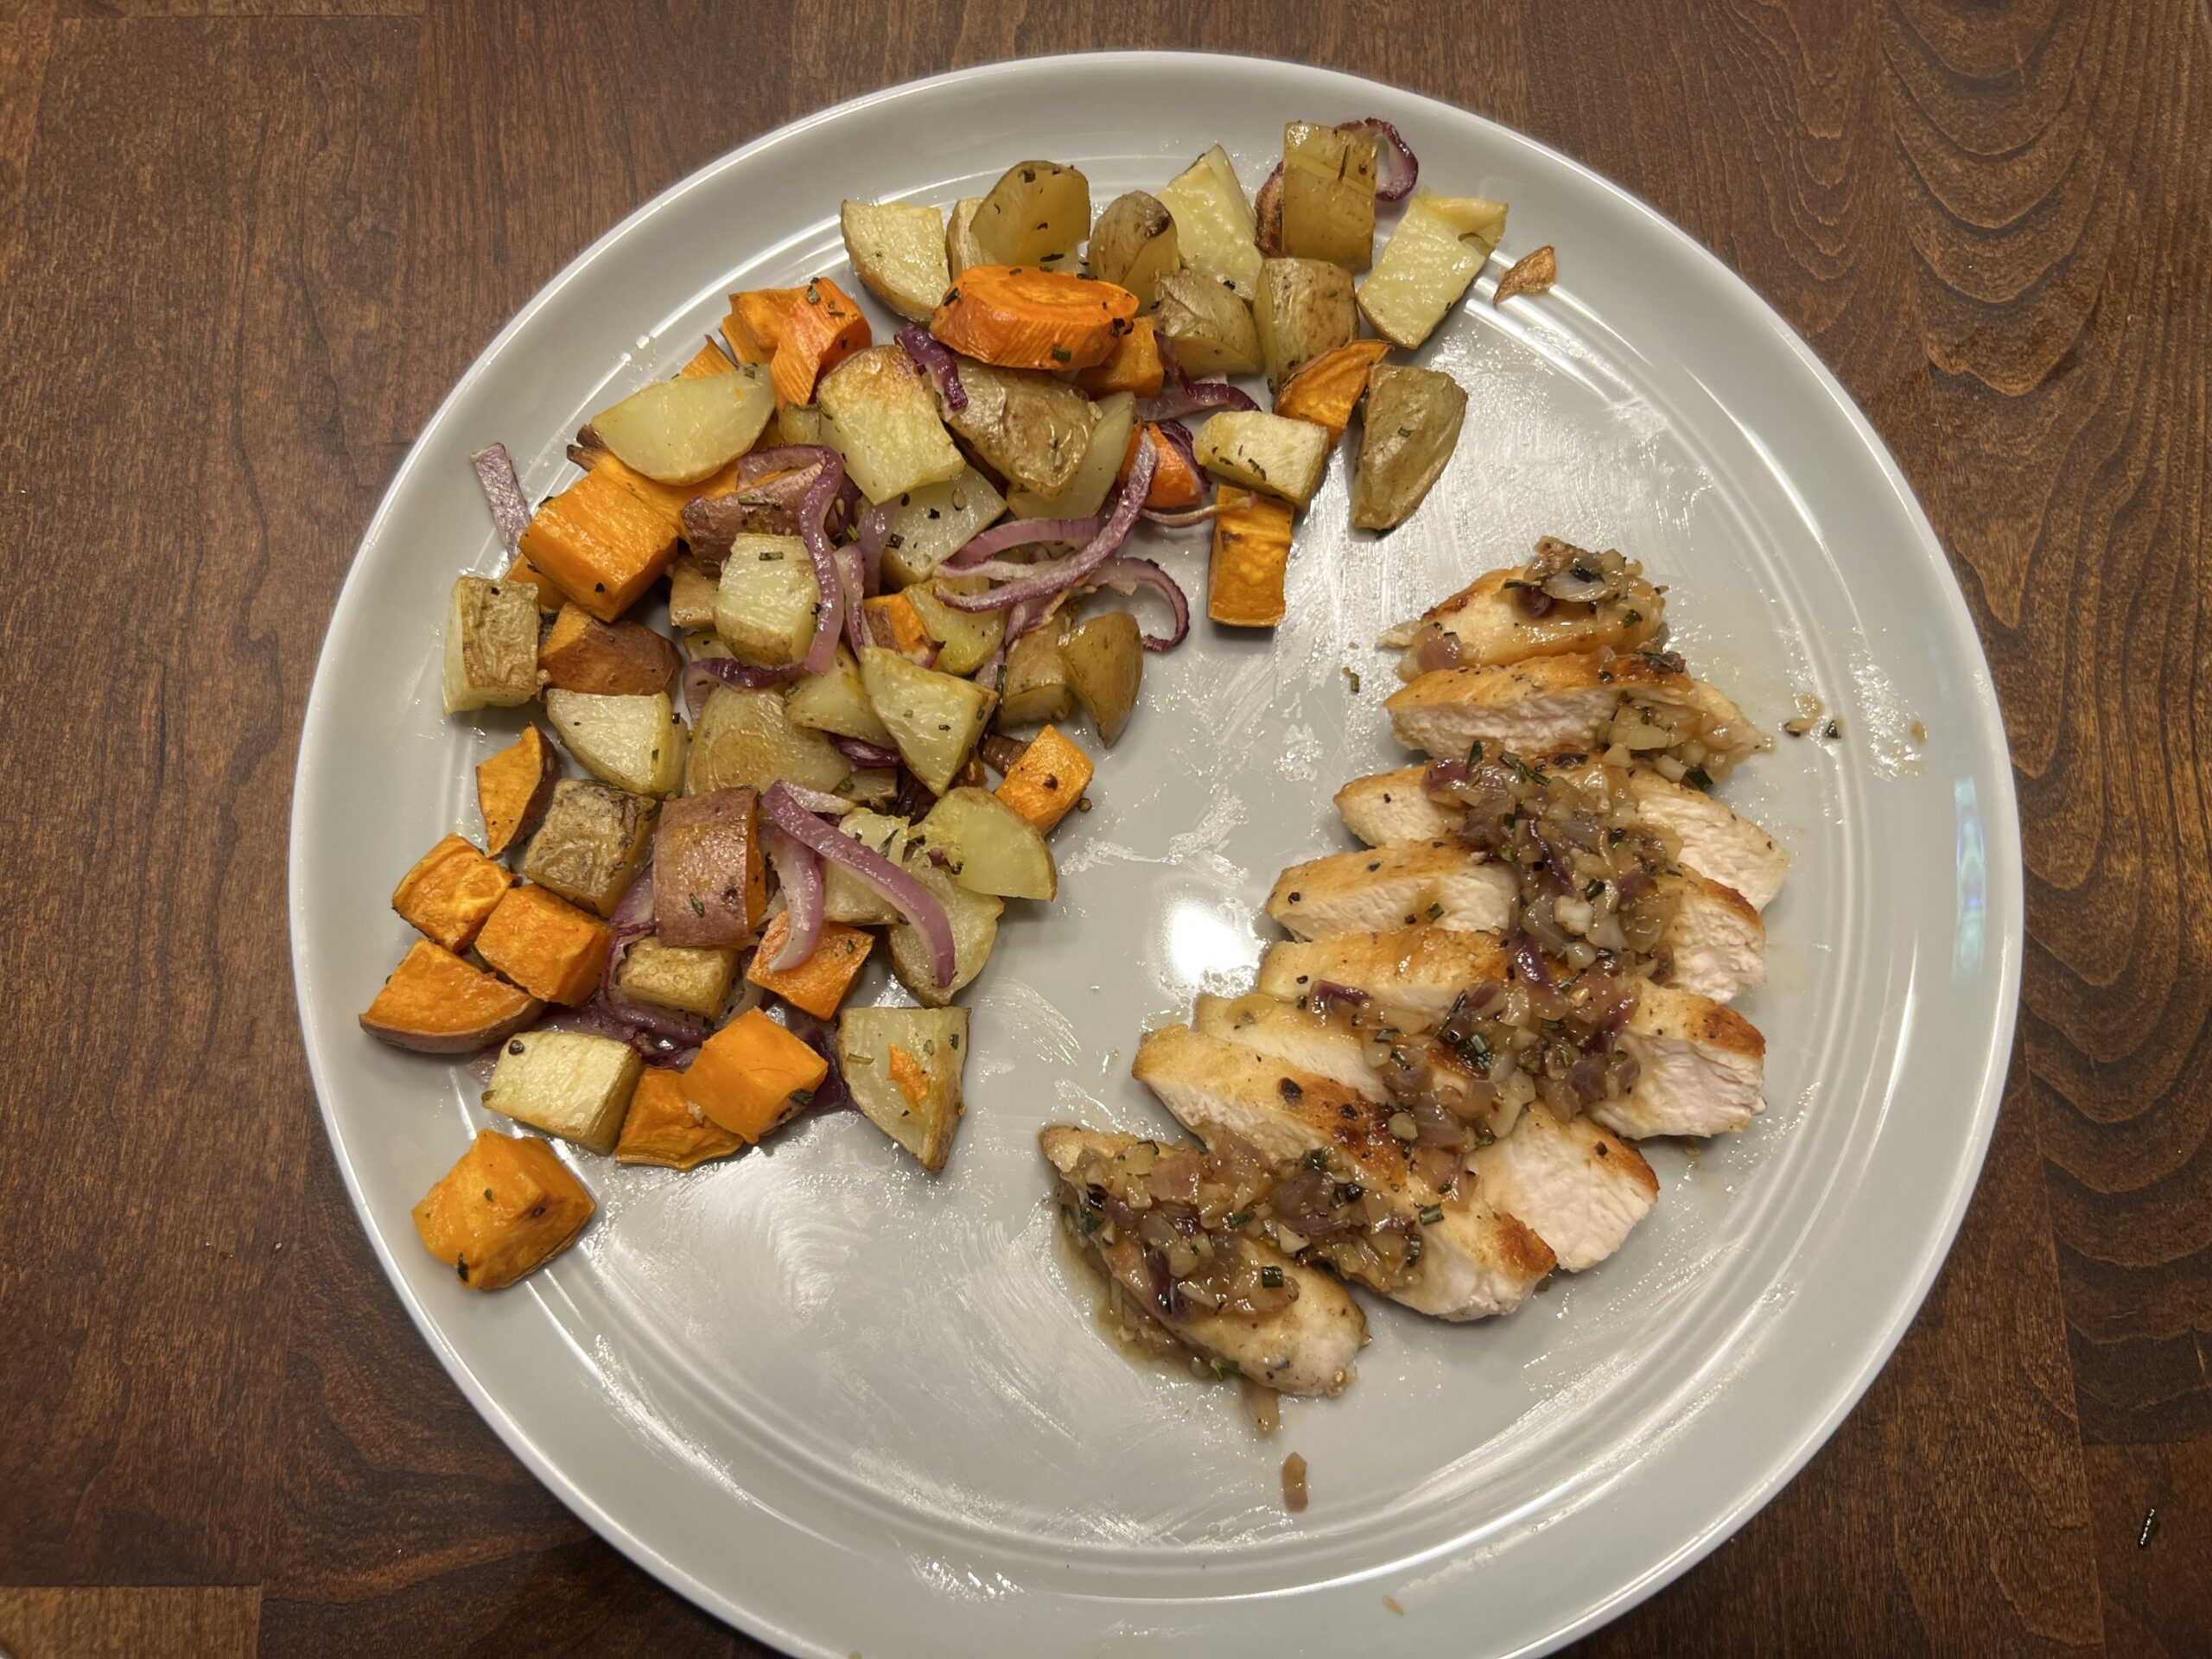 Prepared meal of garlic rosemary chicken with roasted root vegetables from EveryPlate